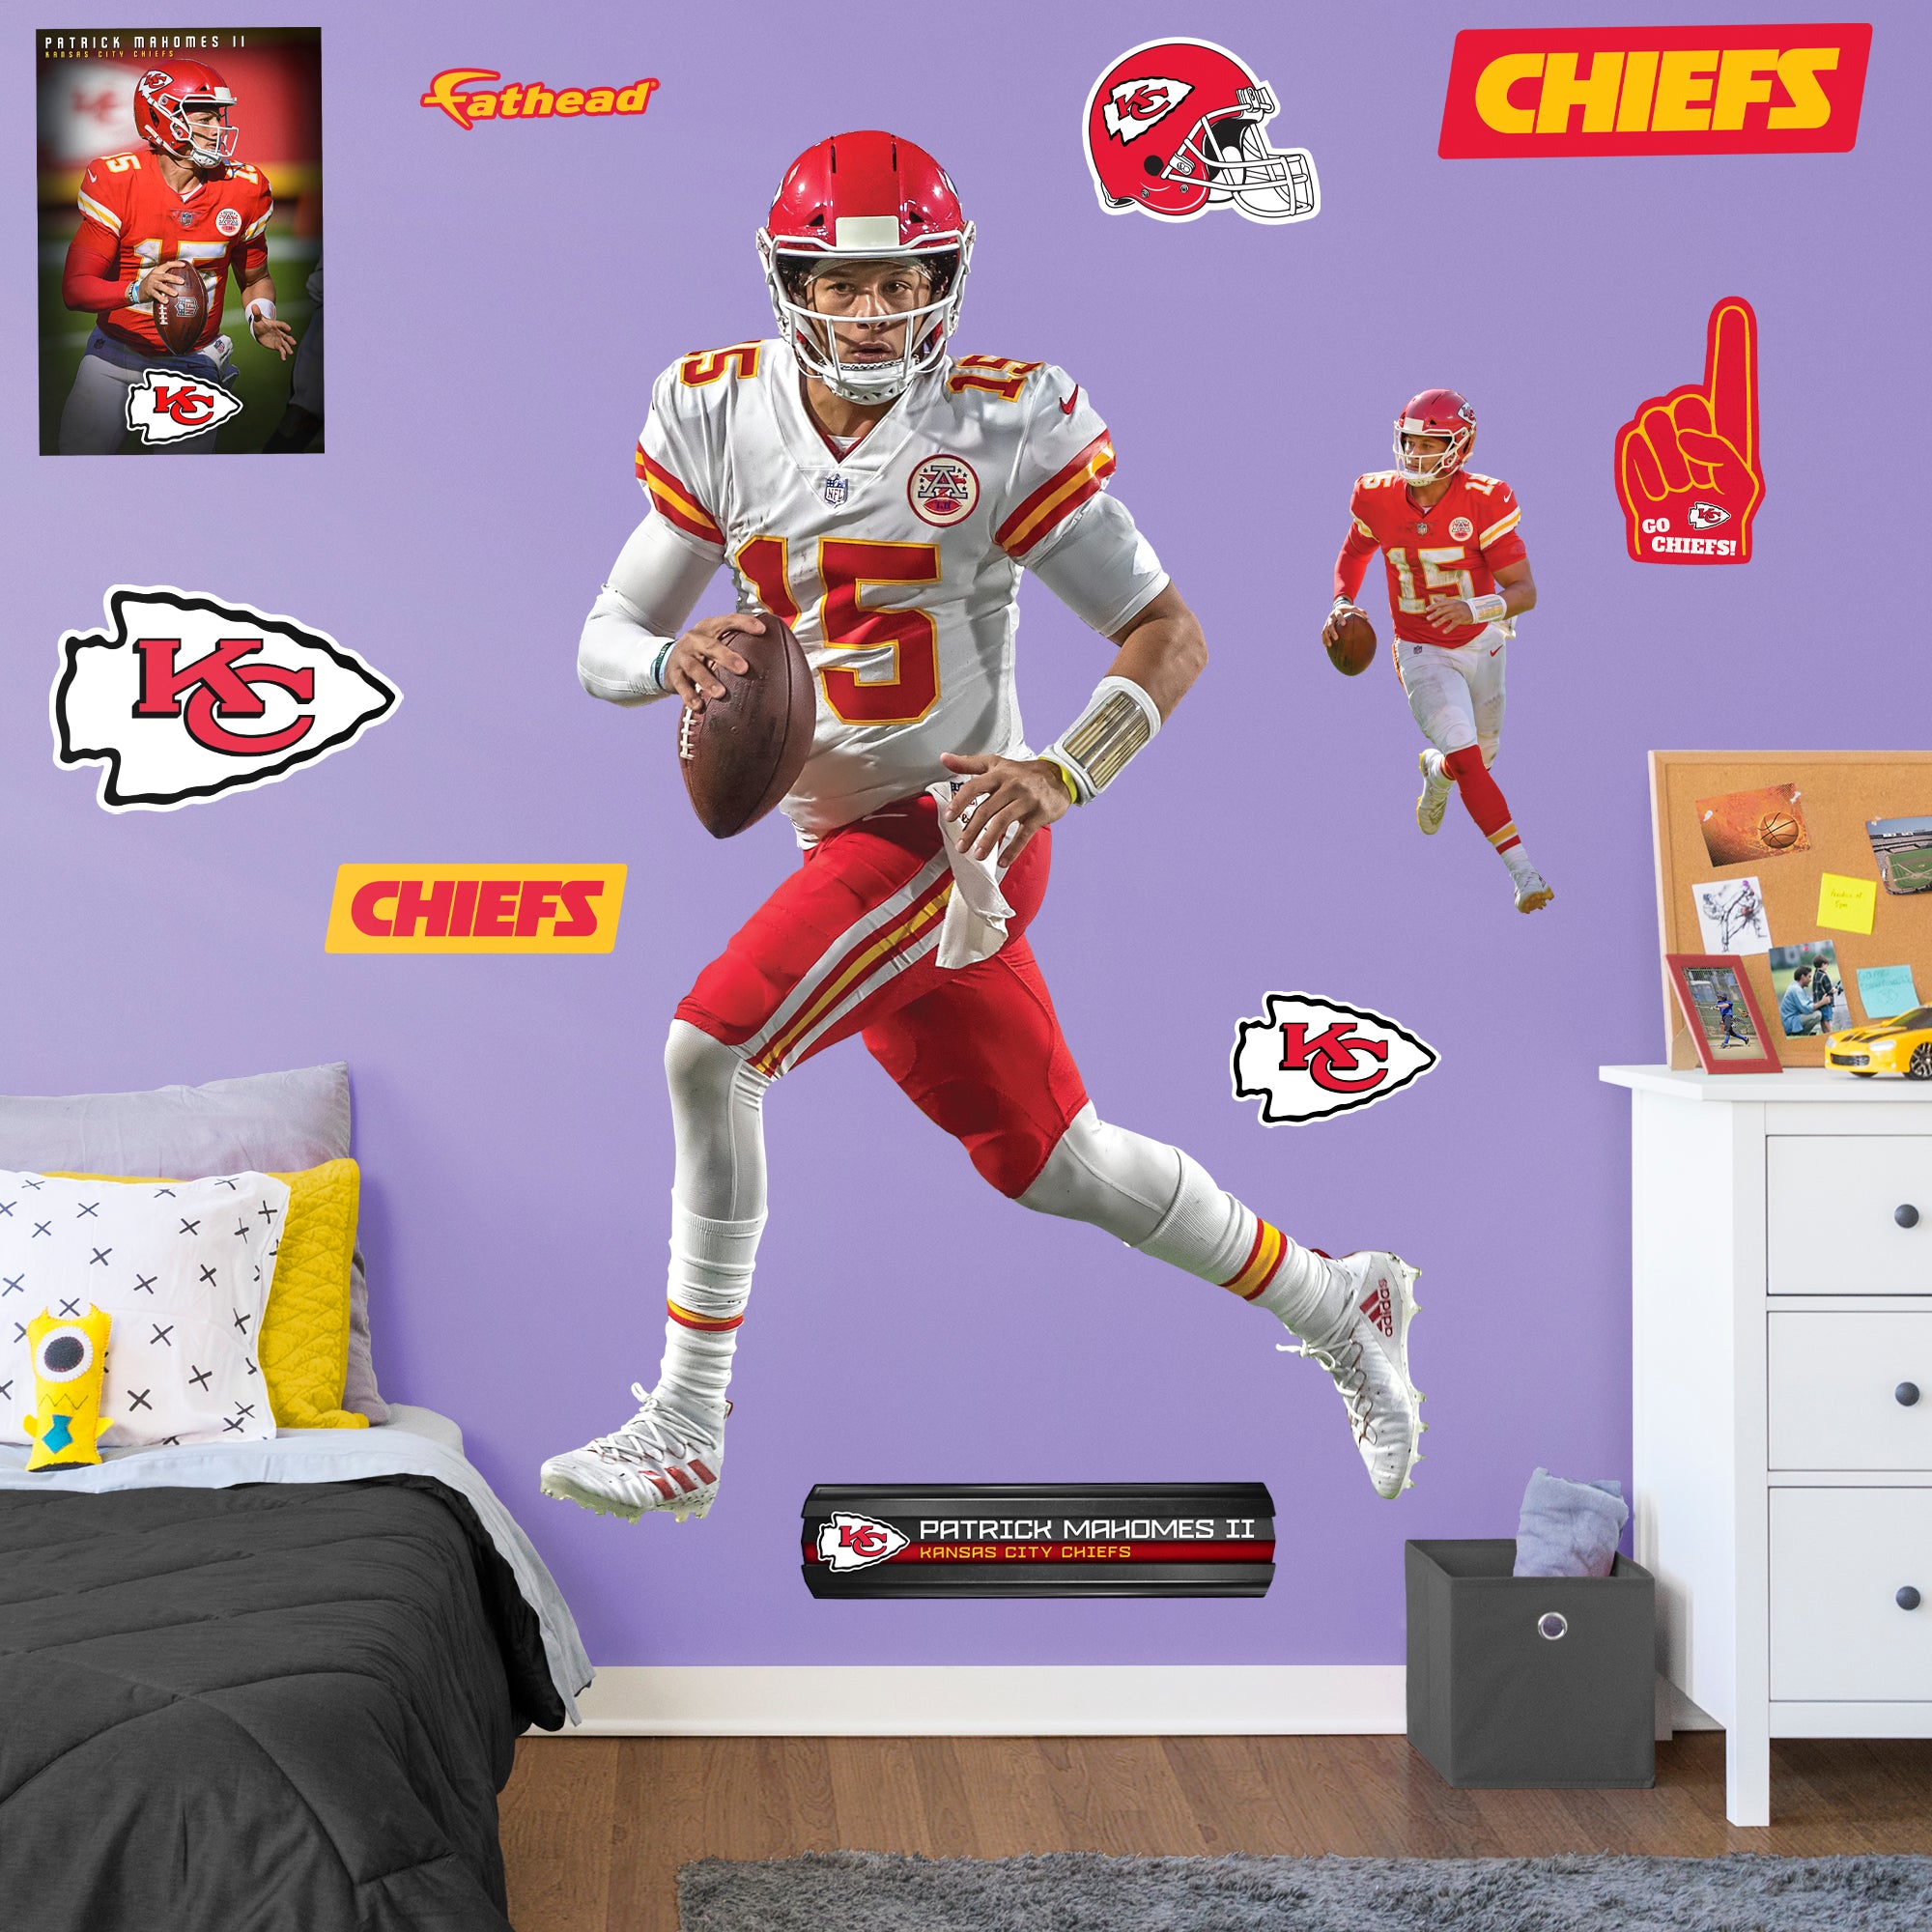 Patrick Mahomes II 2020 White Jersey - Officially Licensed NFL Removable Wall Decal Life-Size Athlete + 10 Decals (47"W x 74"H)